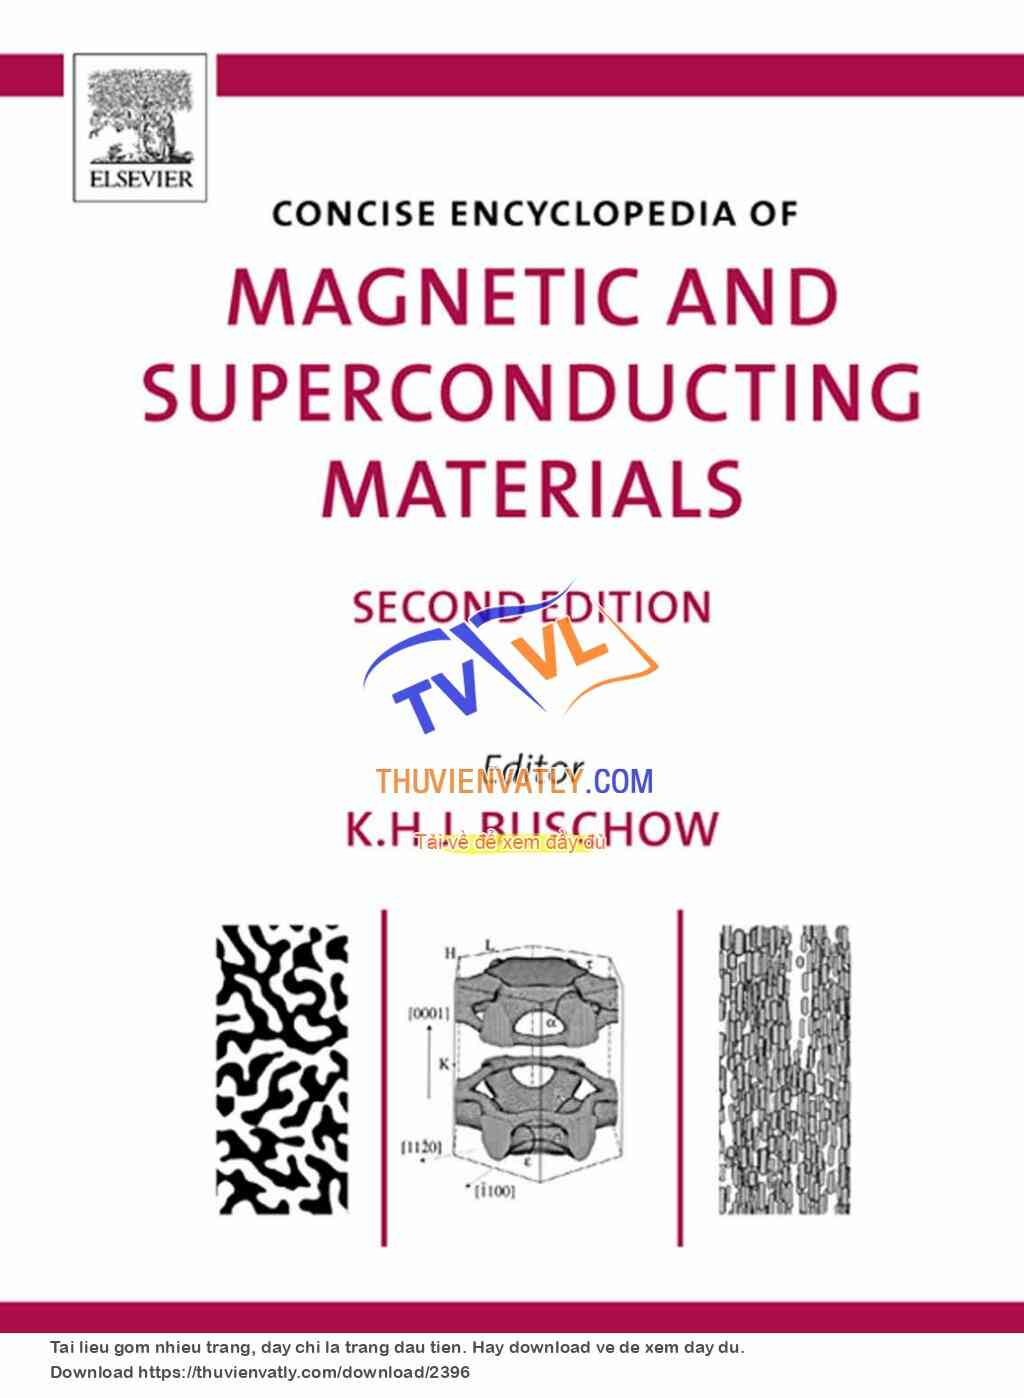 Magnetic and Superconducting Materials